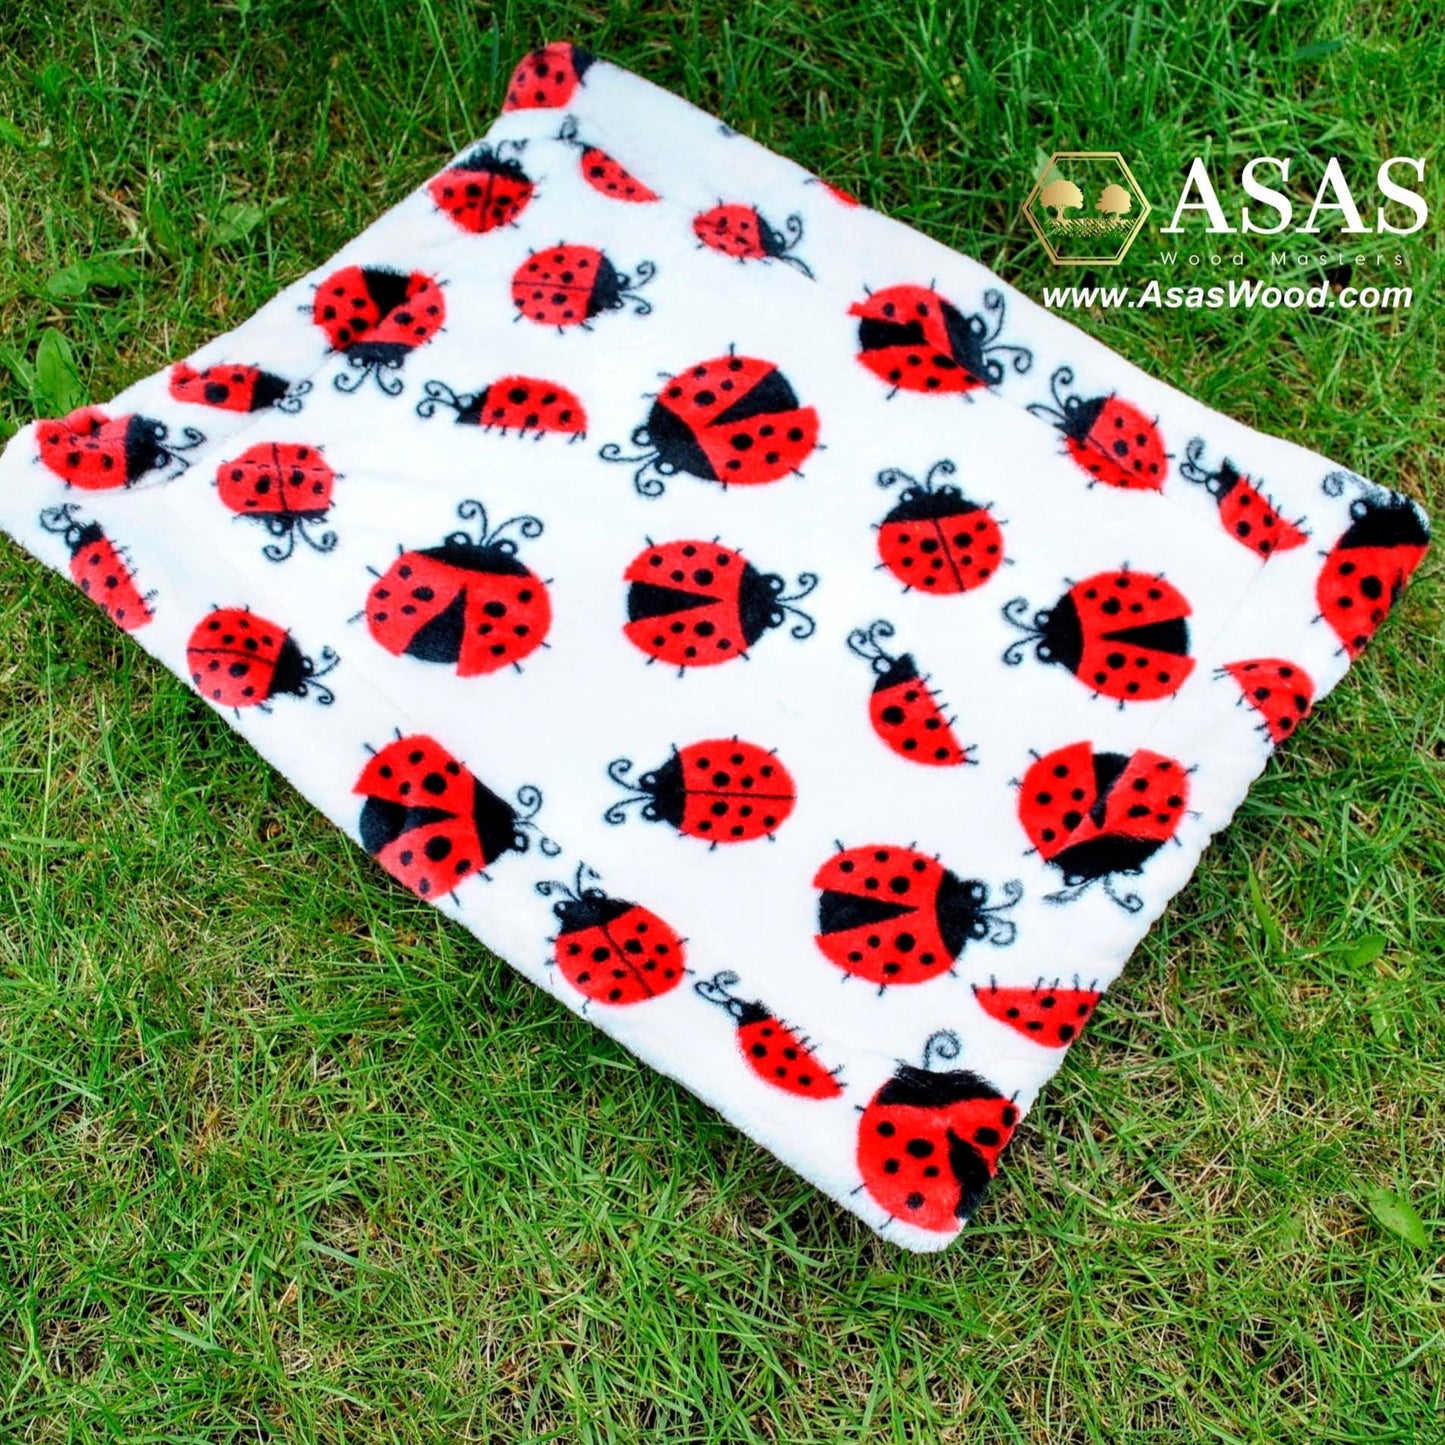 fleece bedding for bunny rabbit bed, made by asaswood